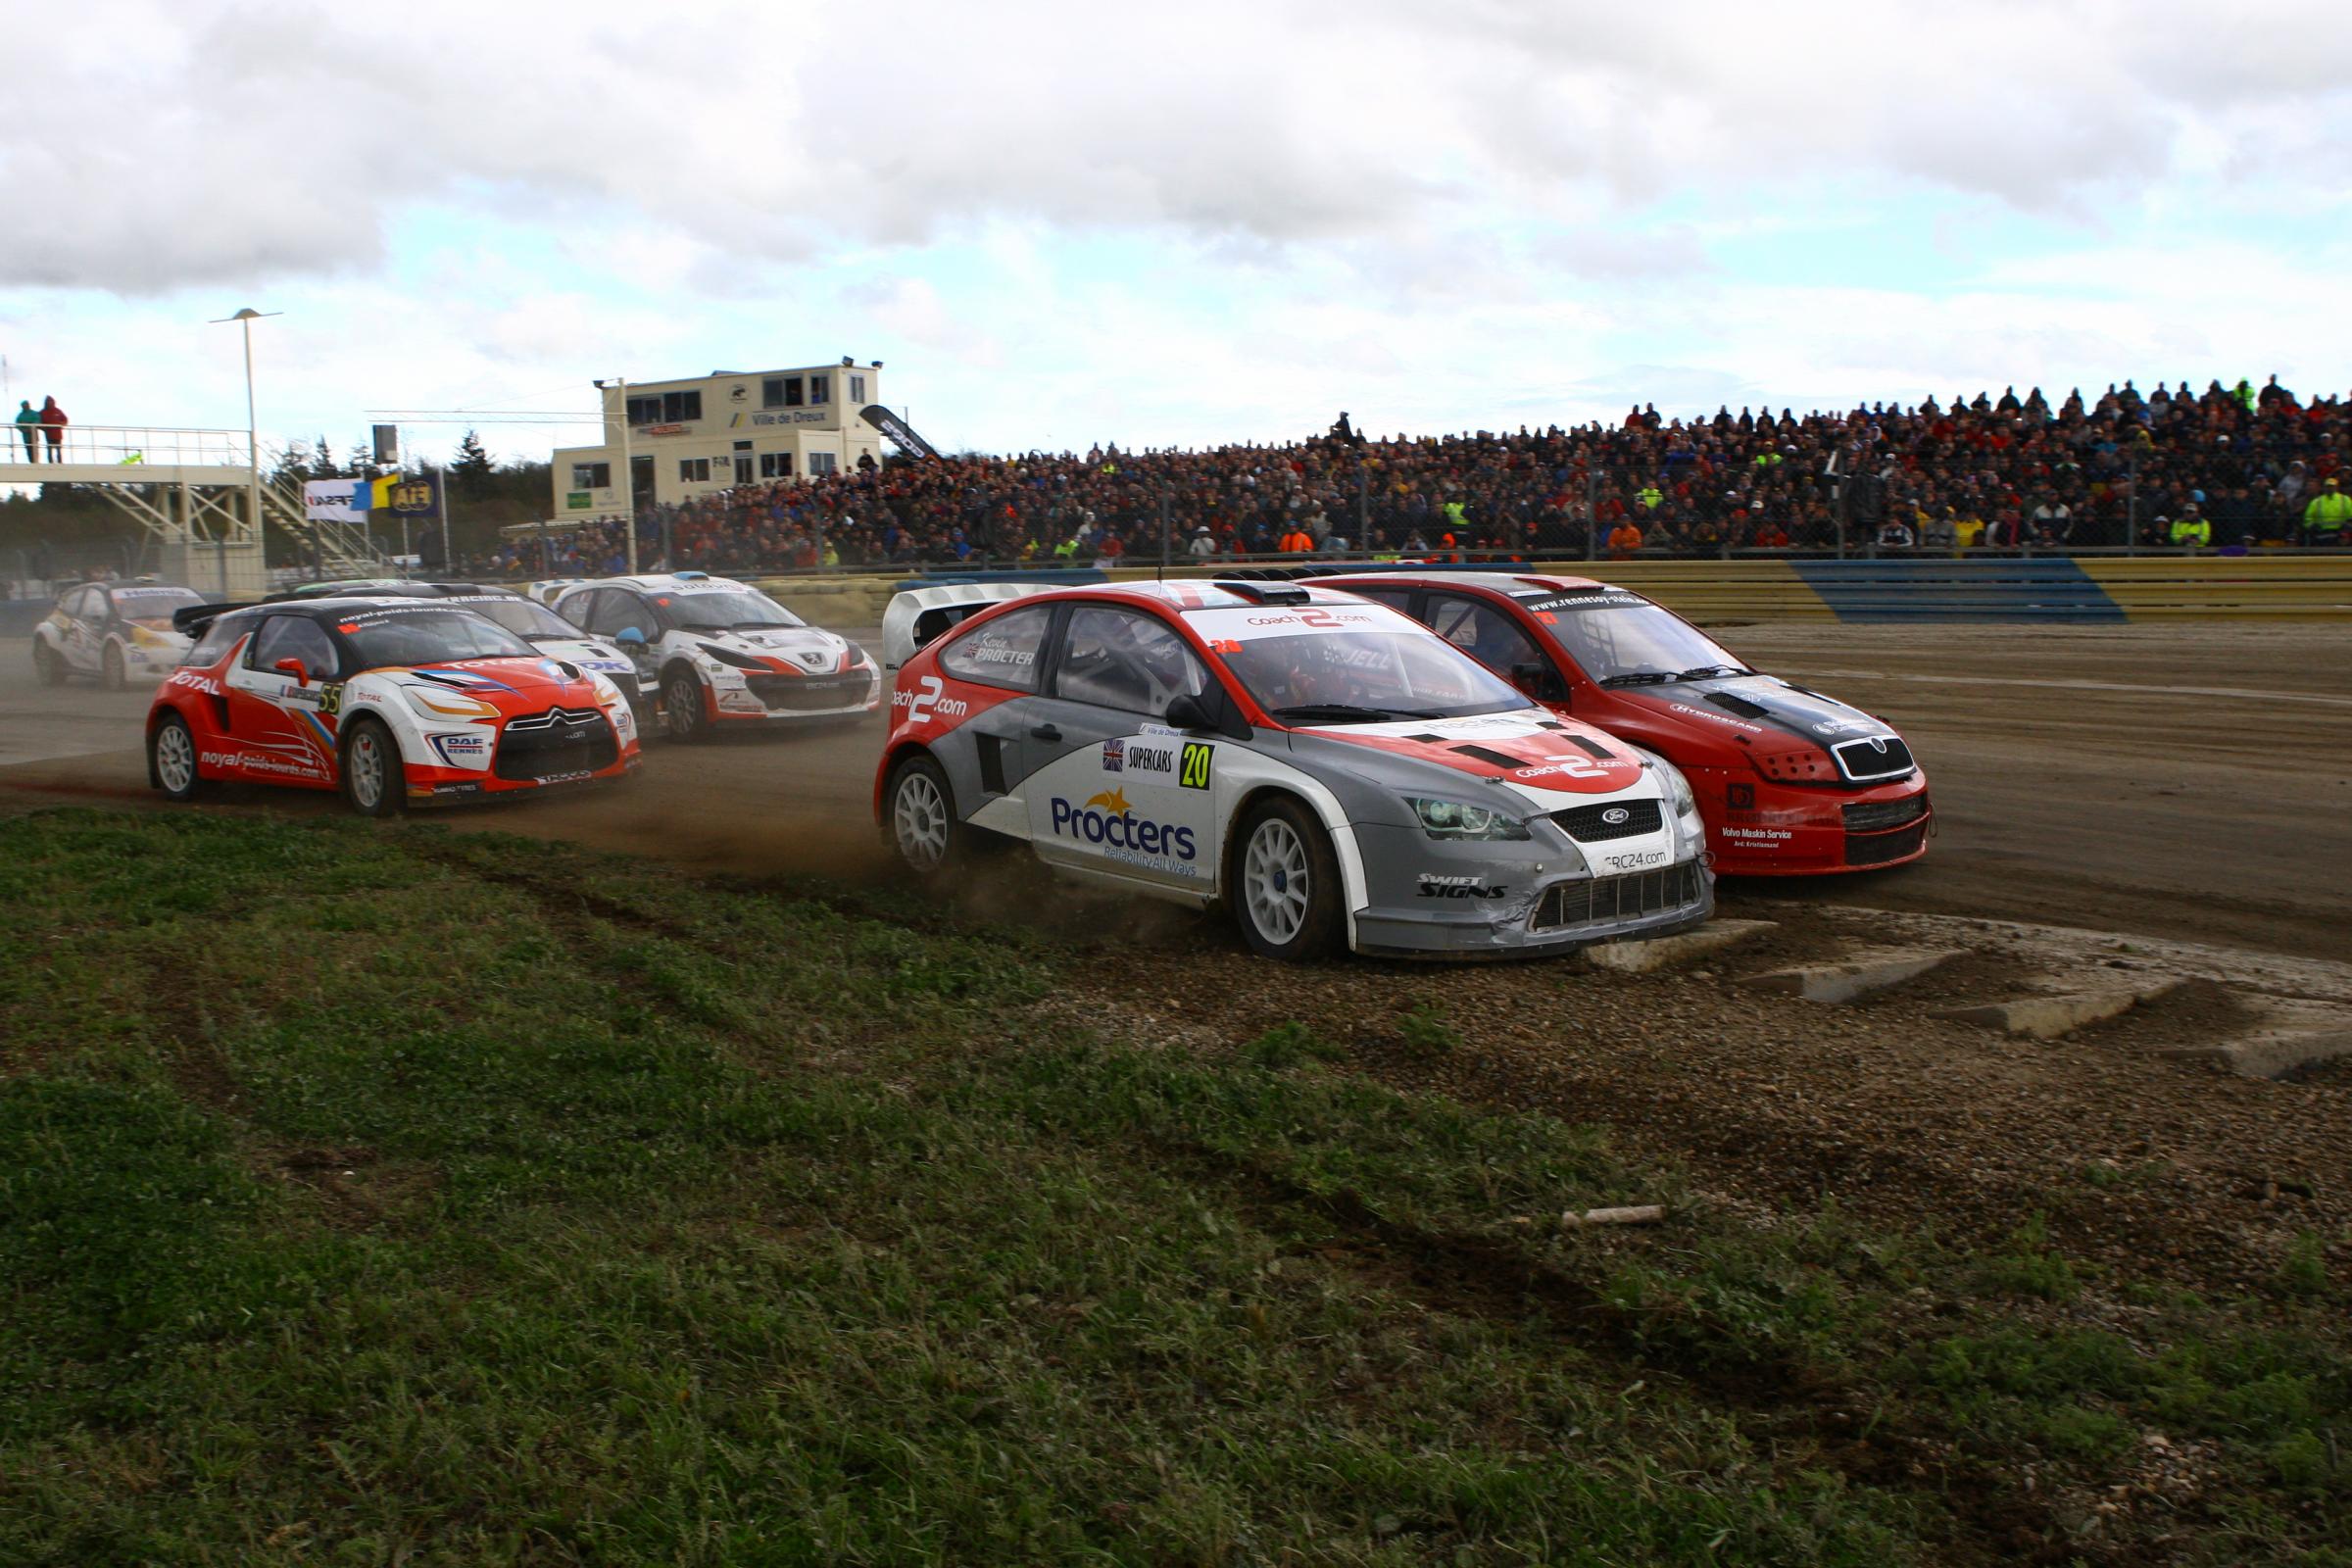 Procter (20) leads the pack into the opening corner on an historic weekend Picture: TIM WHITTINGTON/RALLYCROSSWORLD.COM